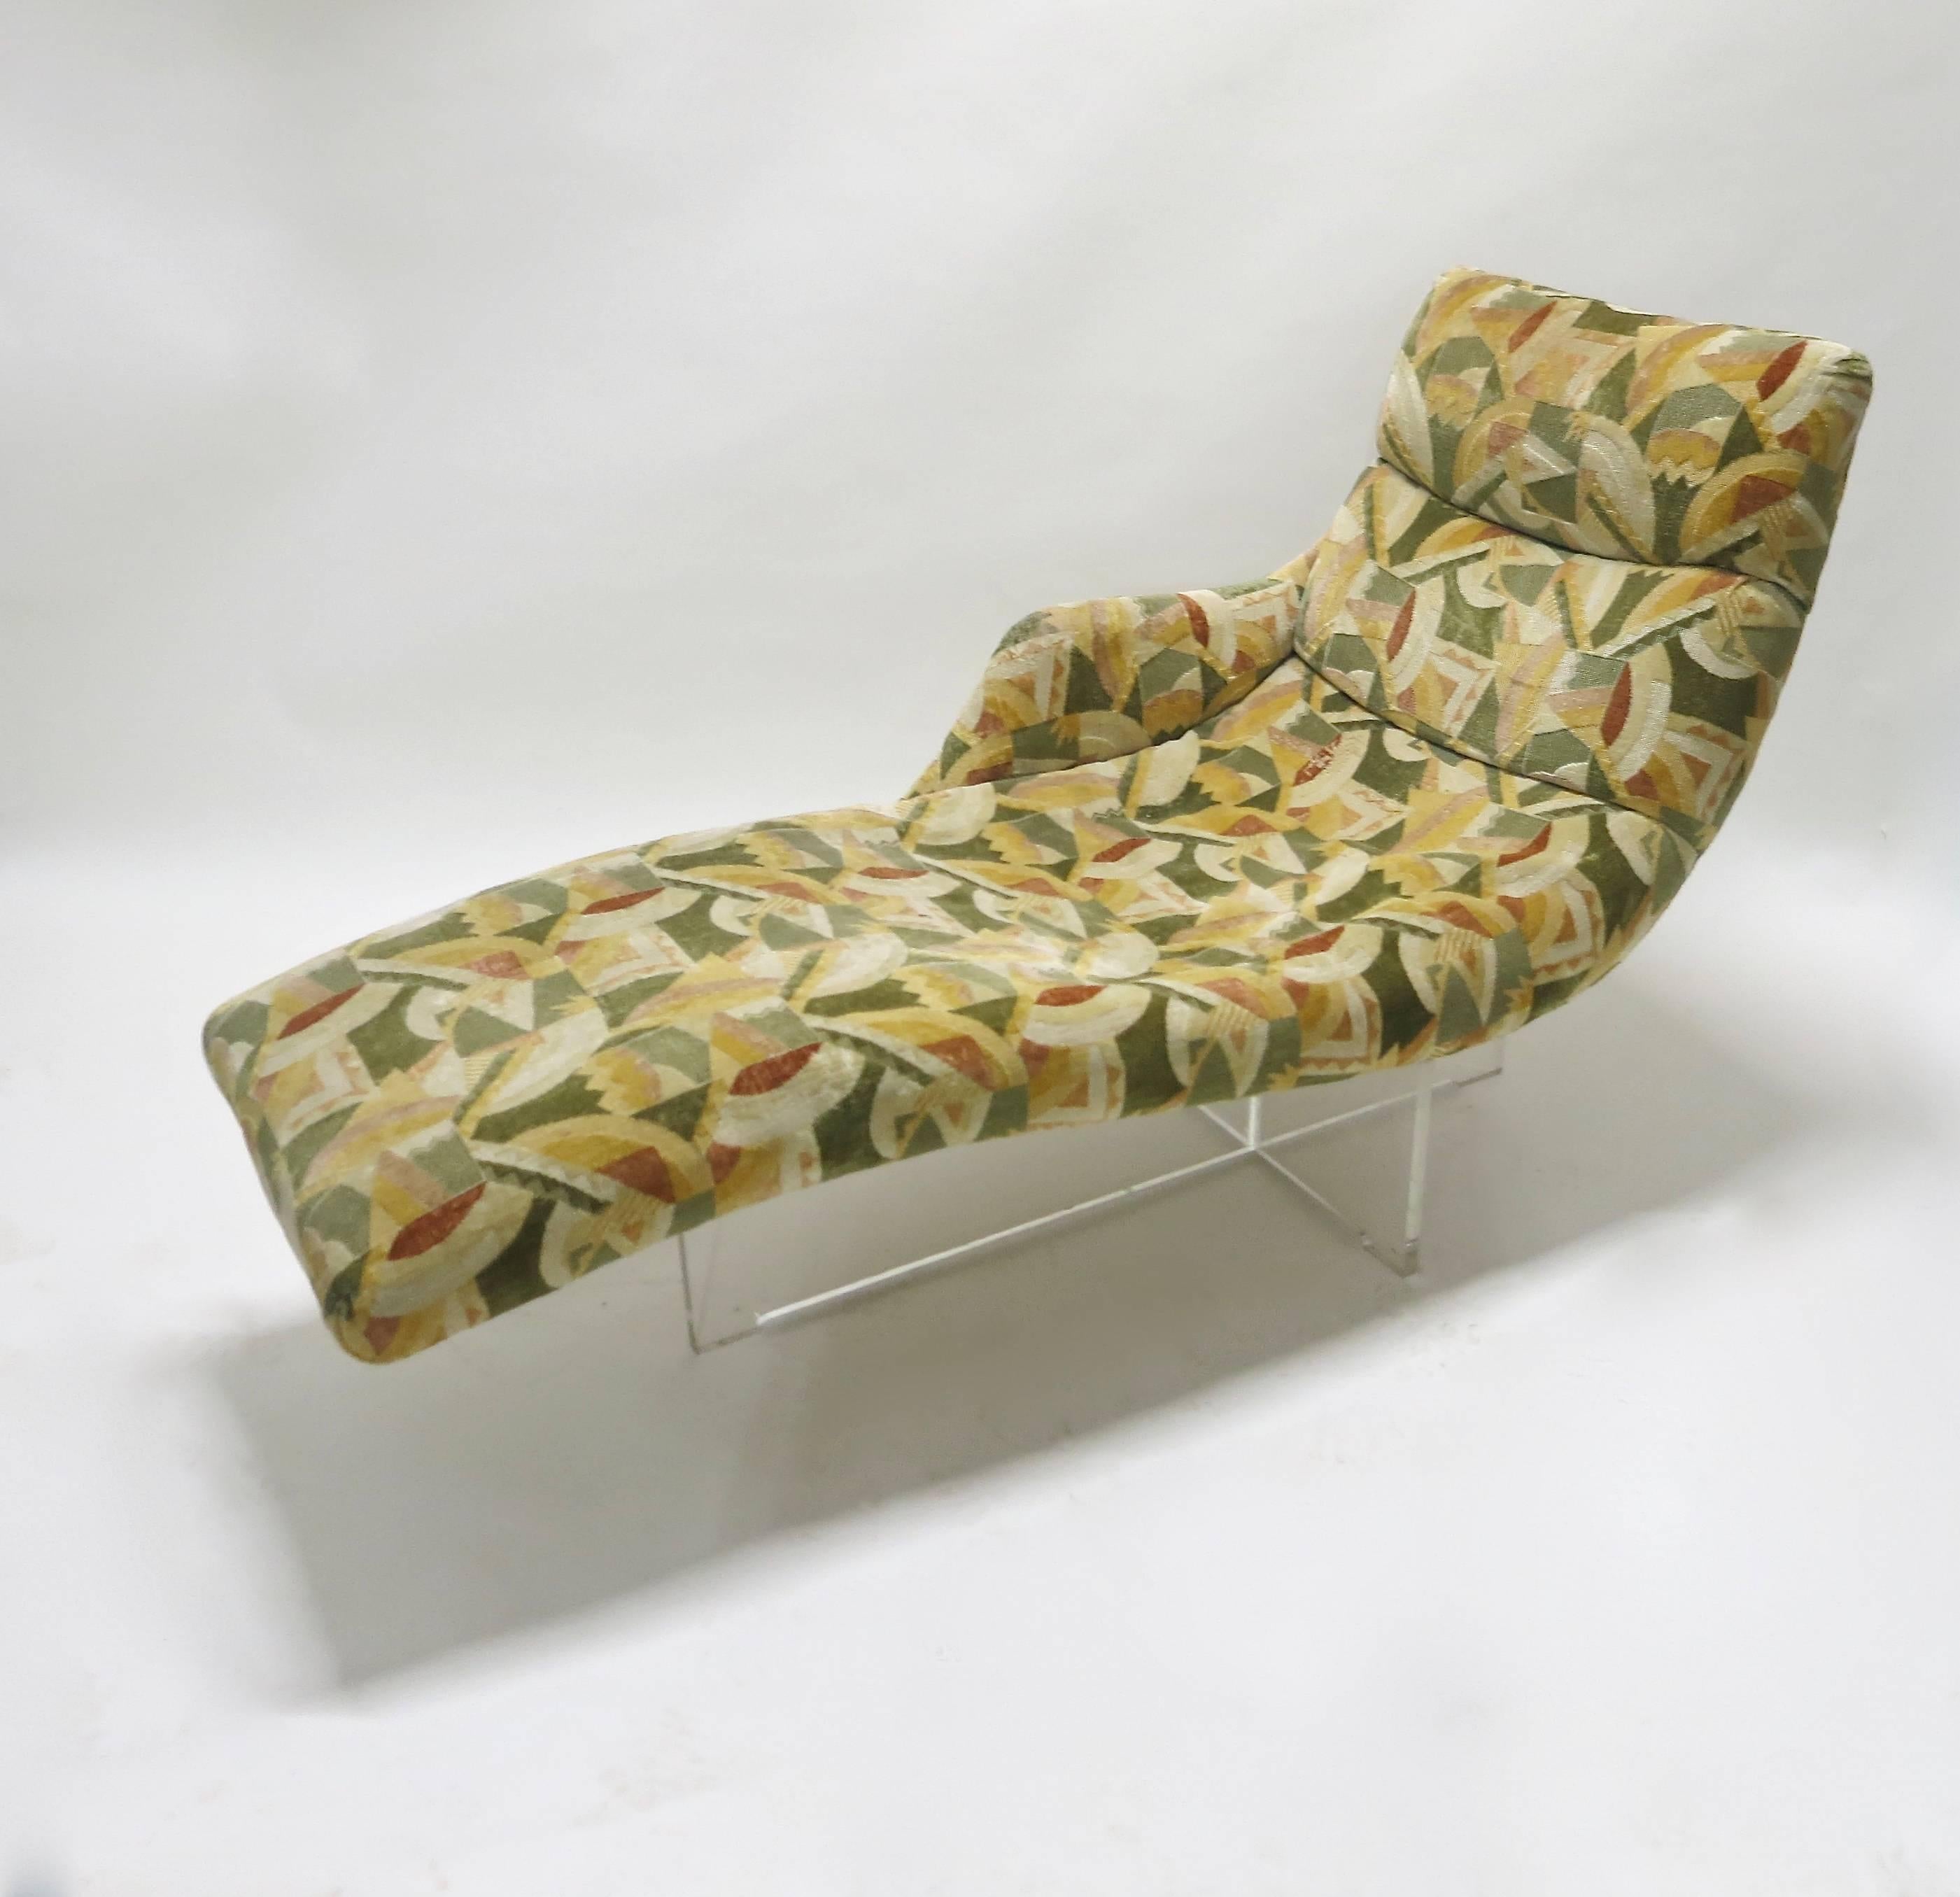 Mid-Century Modern Erica Chaise Longue Designed by Vladimir Kagan in 1969, Made in USA